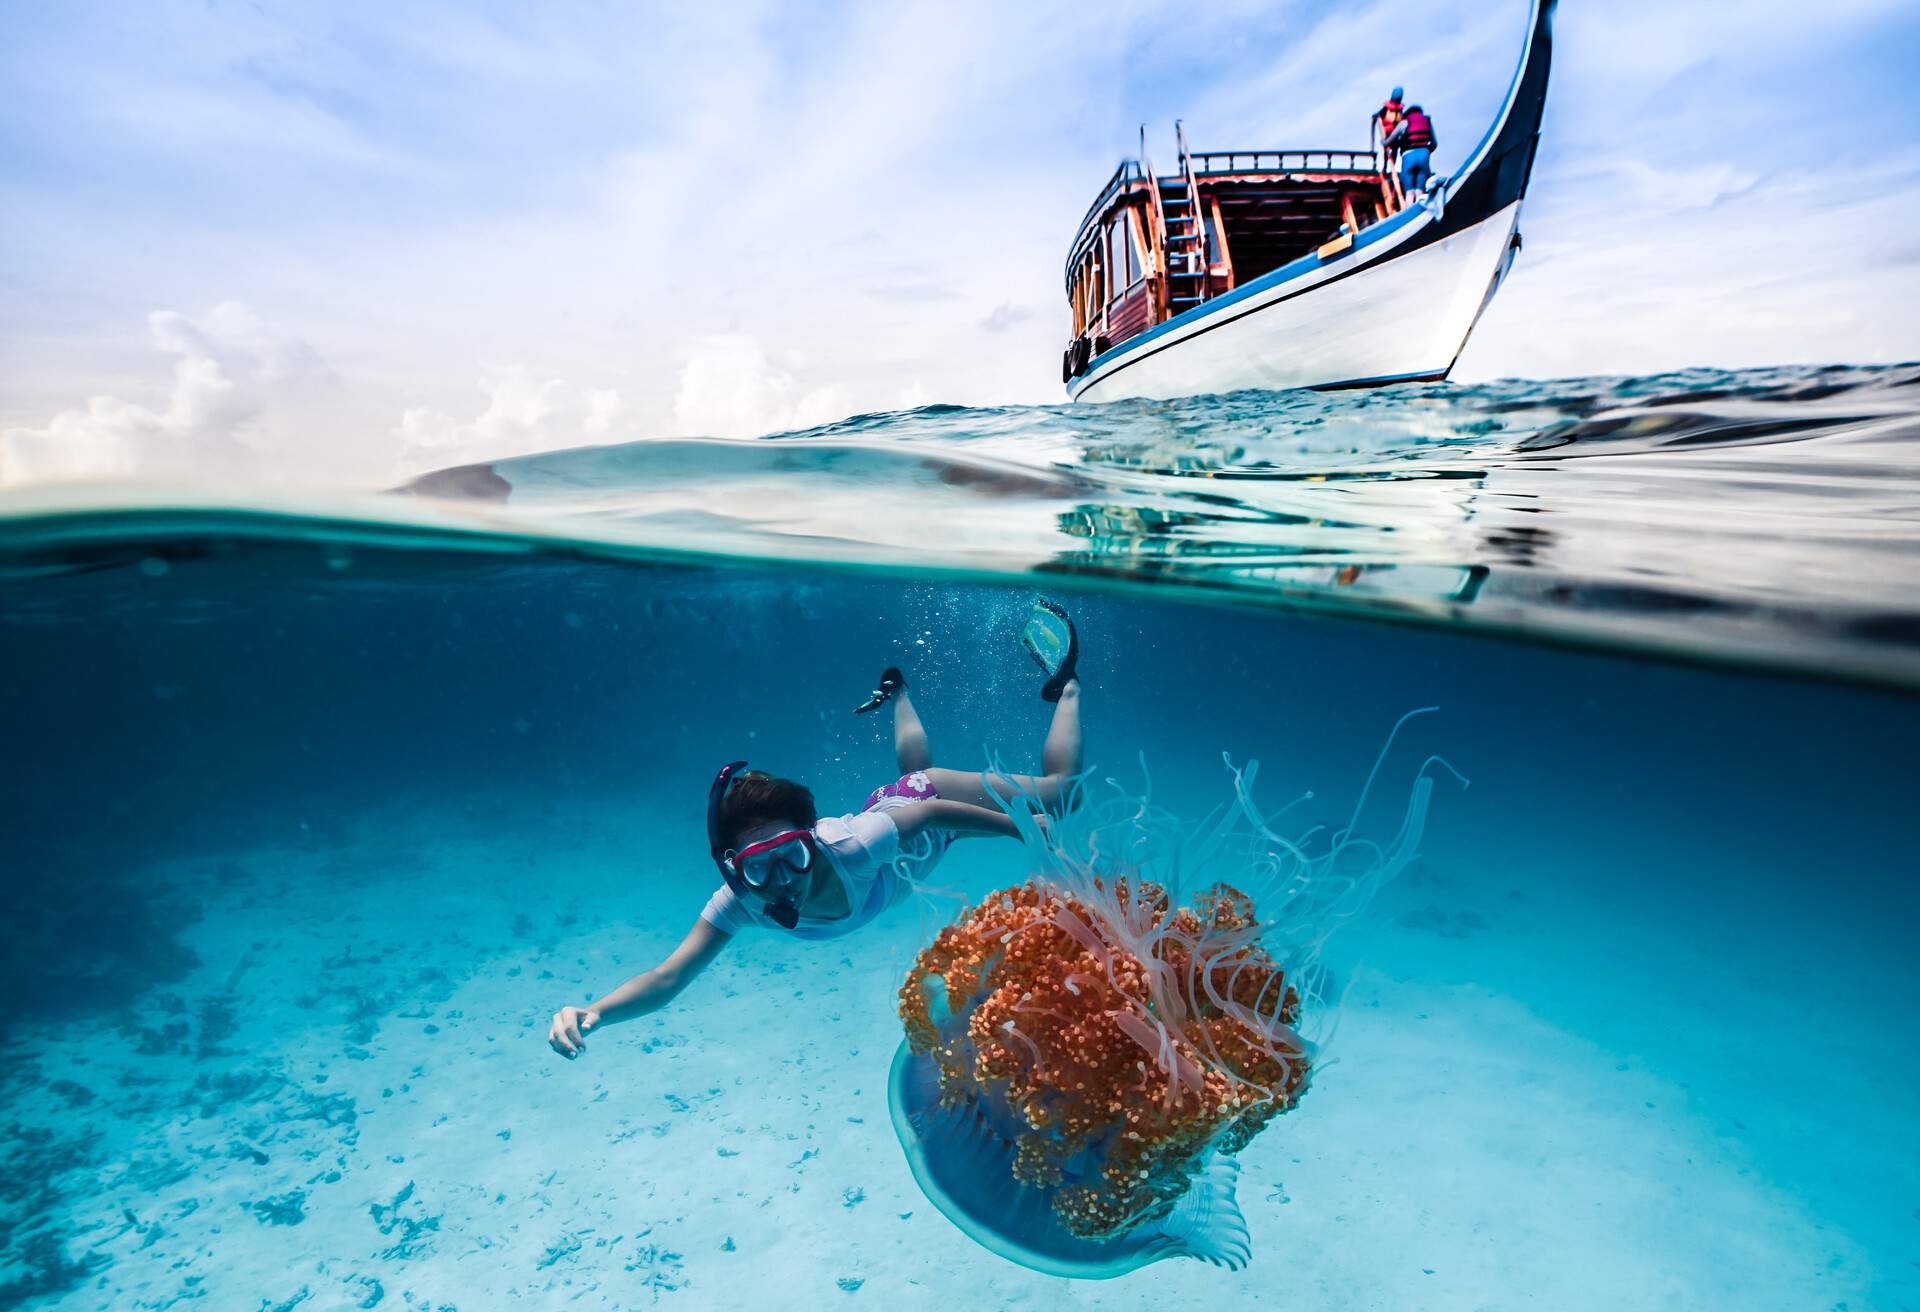 DEST_MALDIVES_THEME_PEOPLE_SNORKELER_AND_JELLYFISH_GettyImages